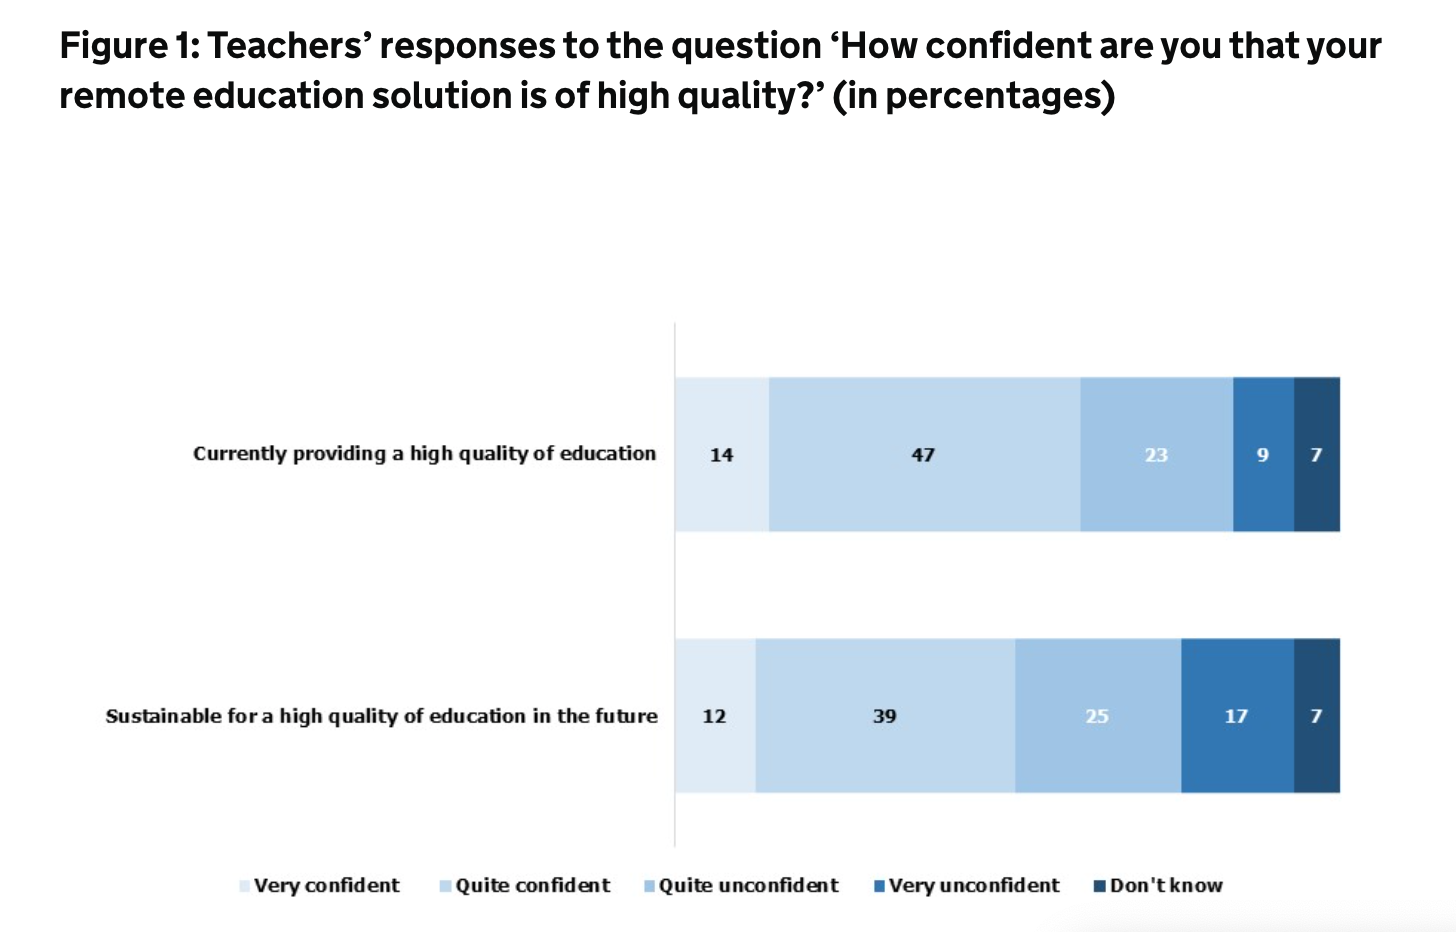 An Ofsted survey says most teachers were confident in the quality of their remote education offer last term.